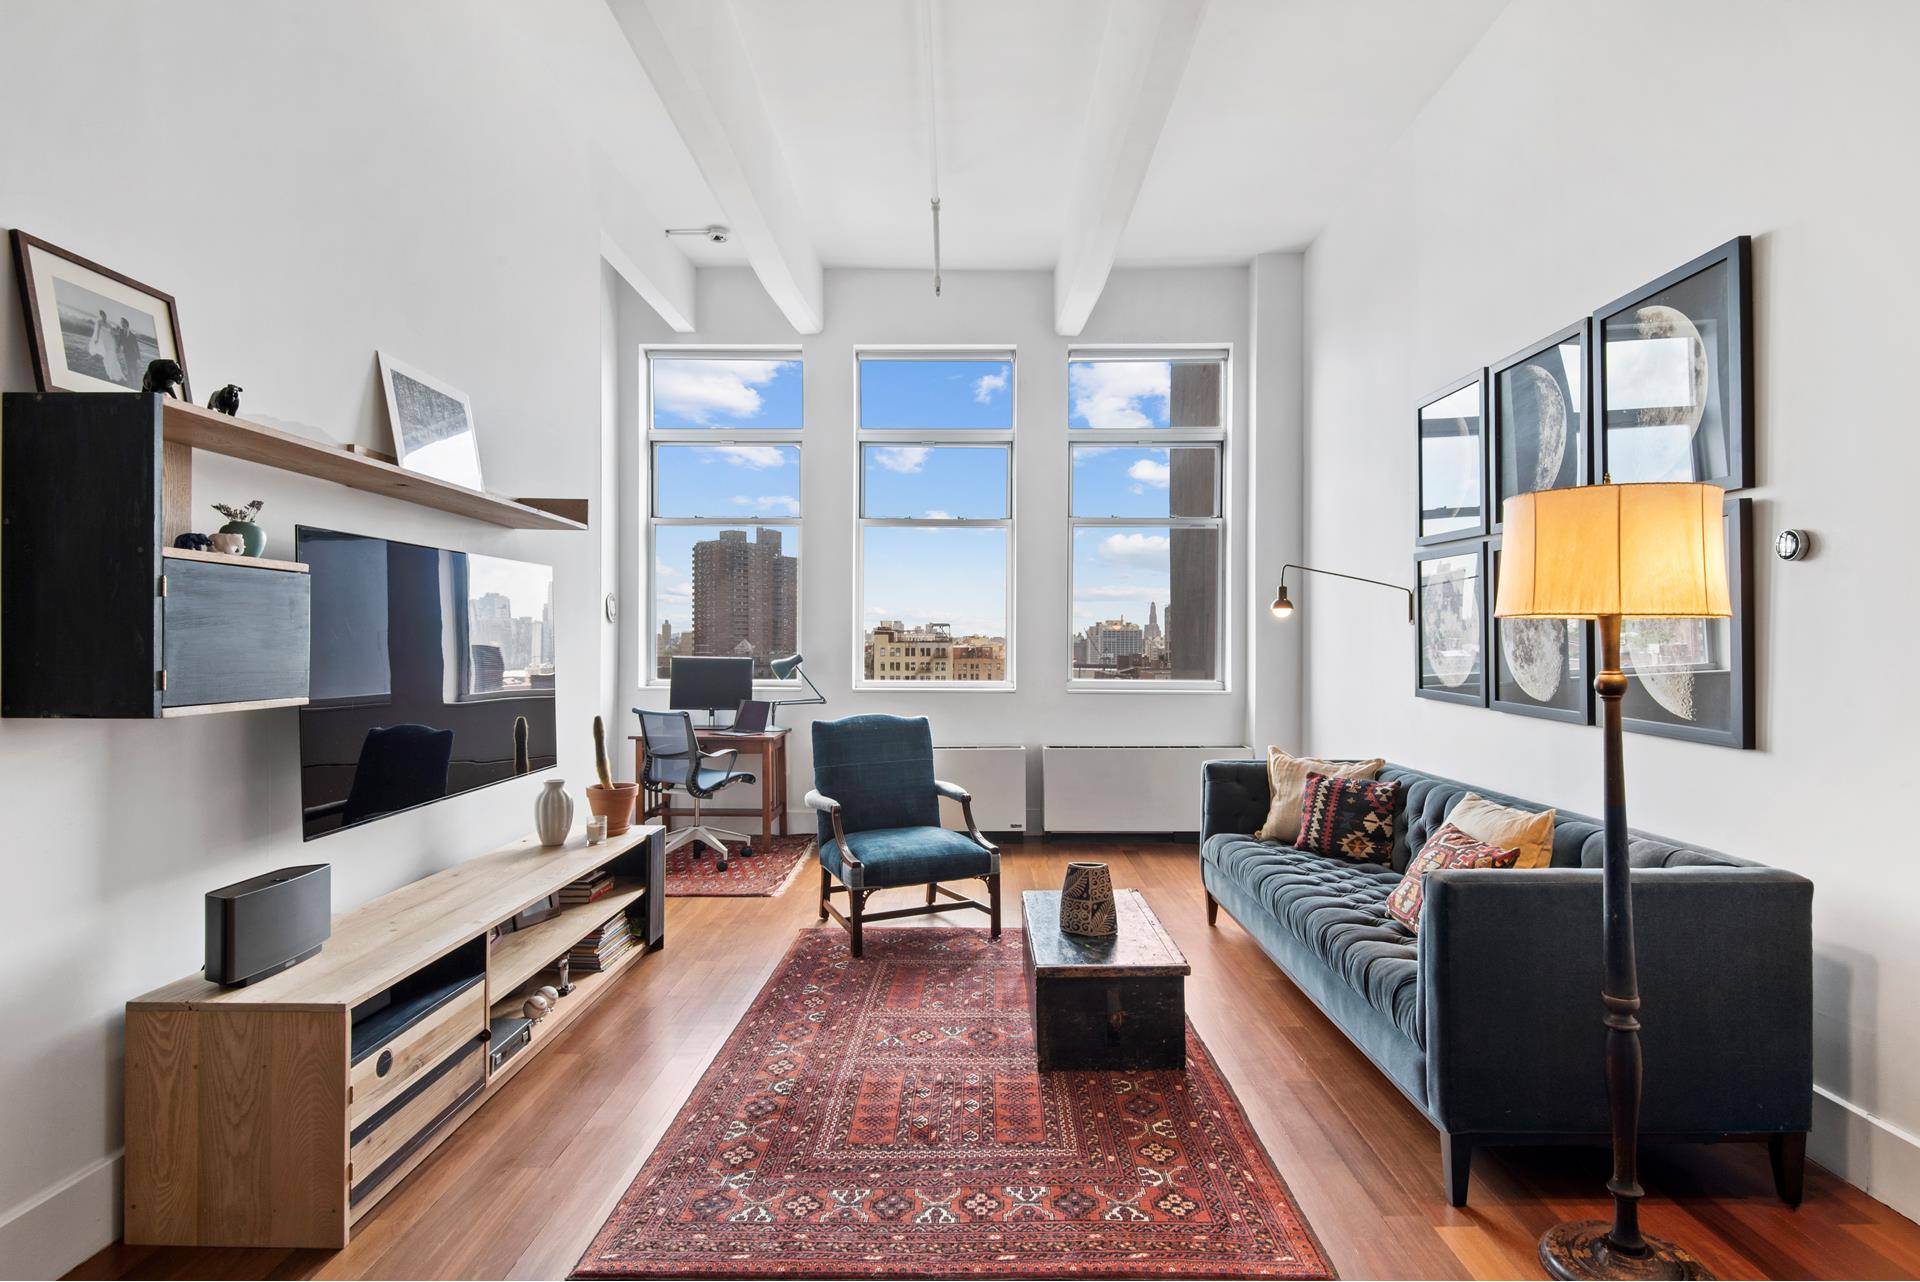 This beautiful loft in one of the most iconic buildings in Williamsburg features 2 bedrooms and 2 bathrooms facing South with beautiful views of Downtown Brooklyn and the Manhatthan Bridge.